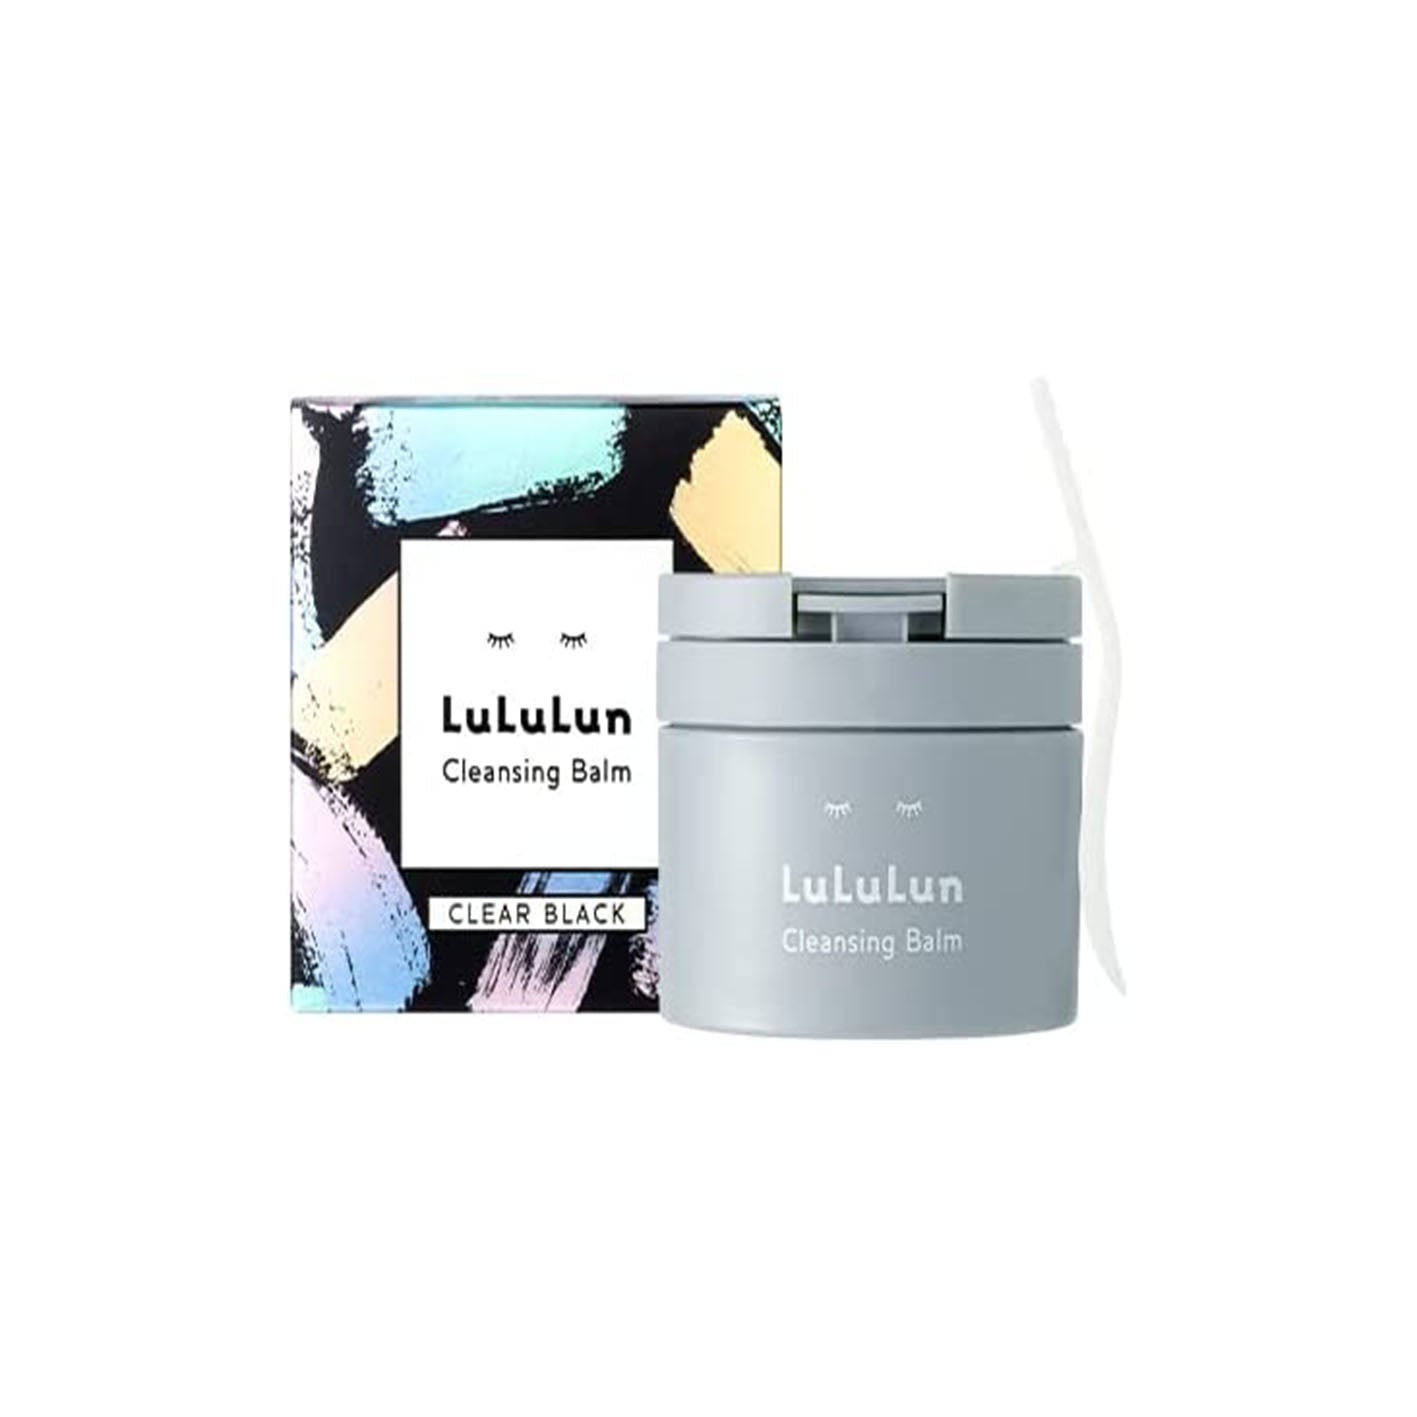 Lululun Cleansing Balm 90g - Clear Black - Harajuku Culture Japan - Japanease Products Store Beauty and Stationery